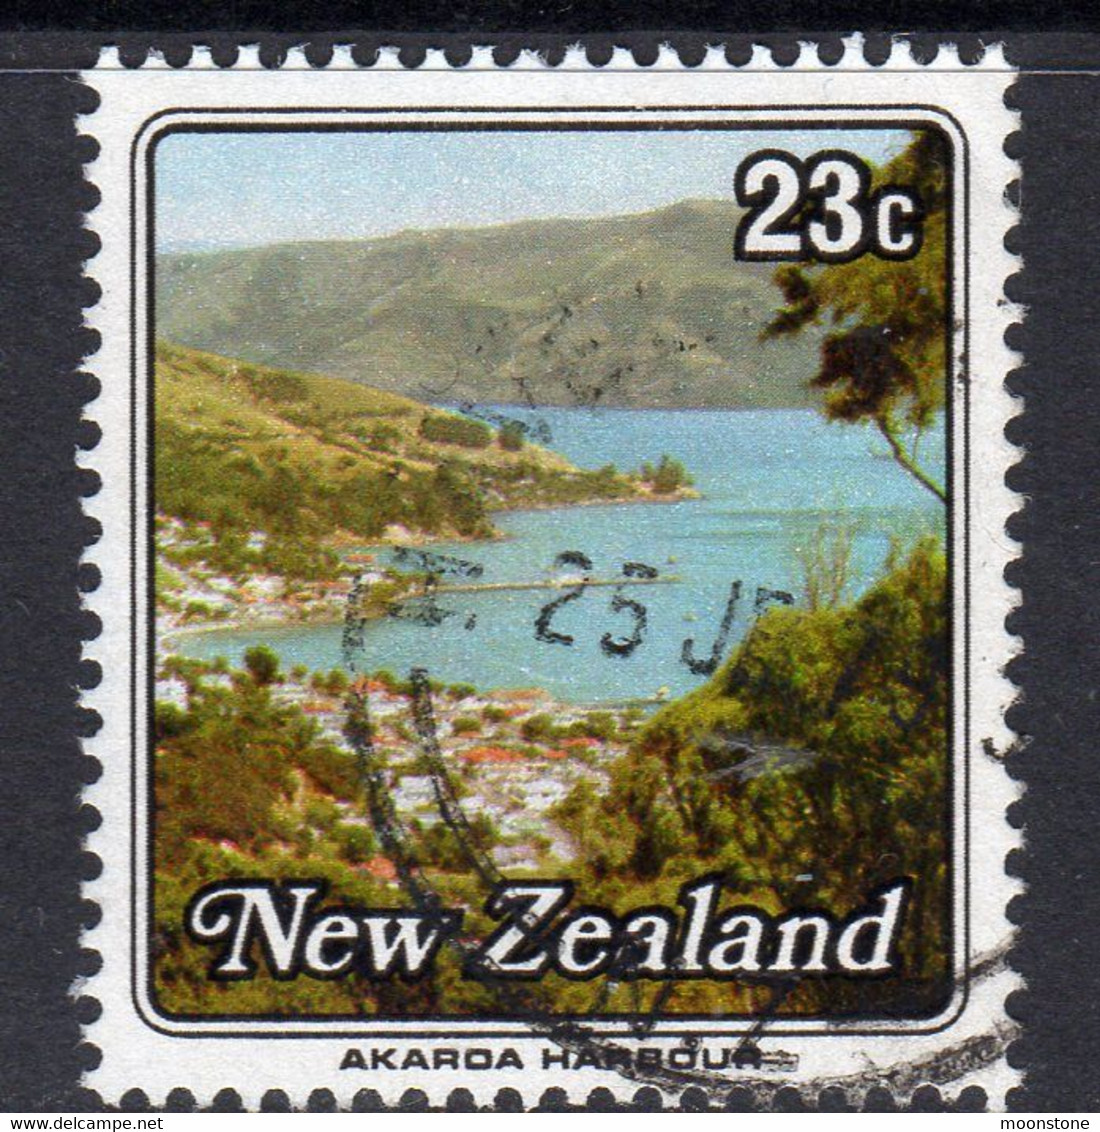 New Zealand 1979 Small Harbours 23c Value, Used, SG 1194 (A) - Used Stamps